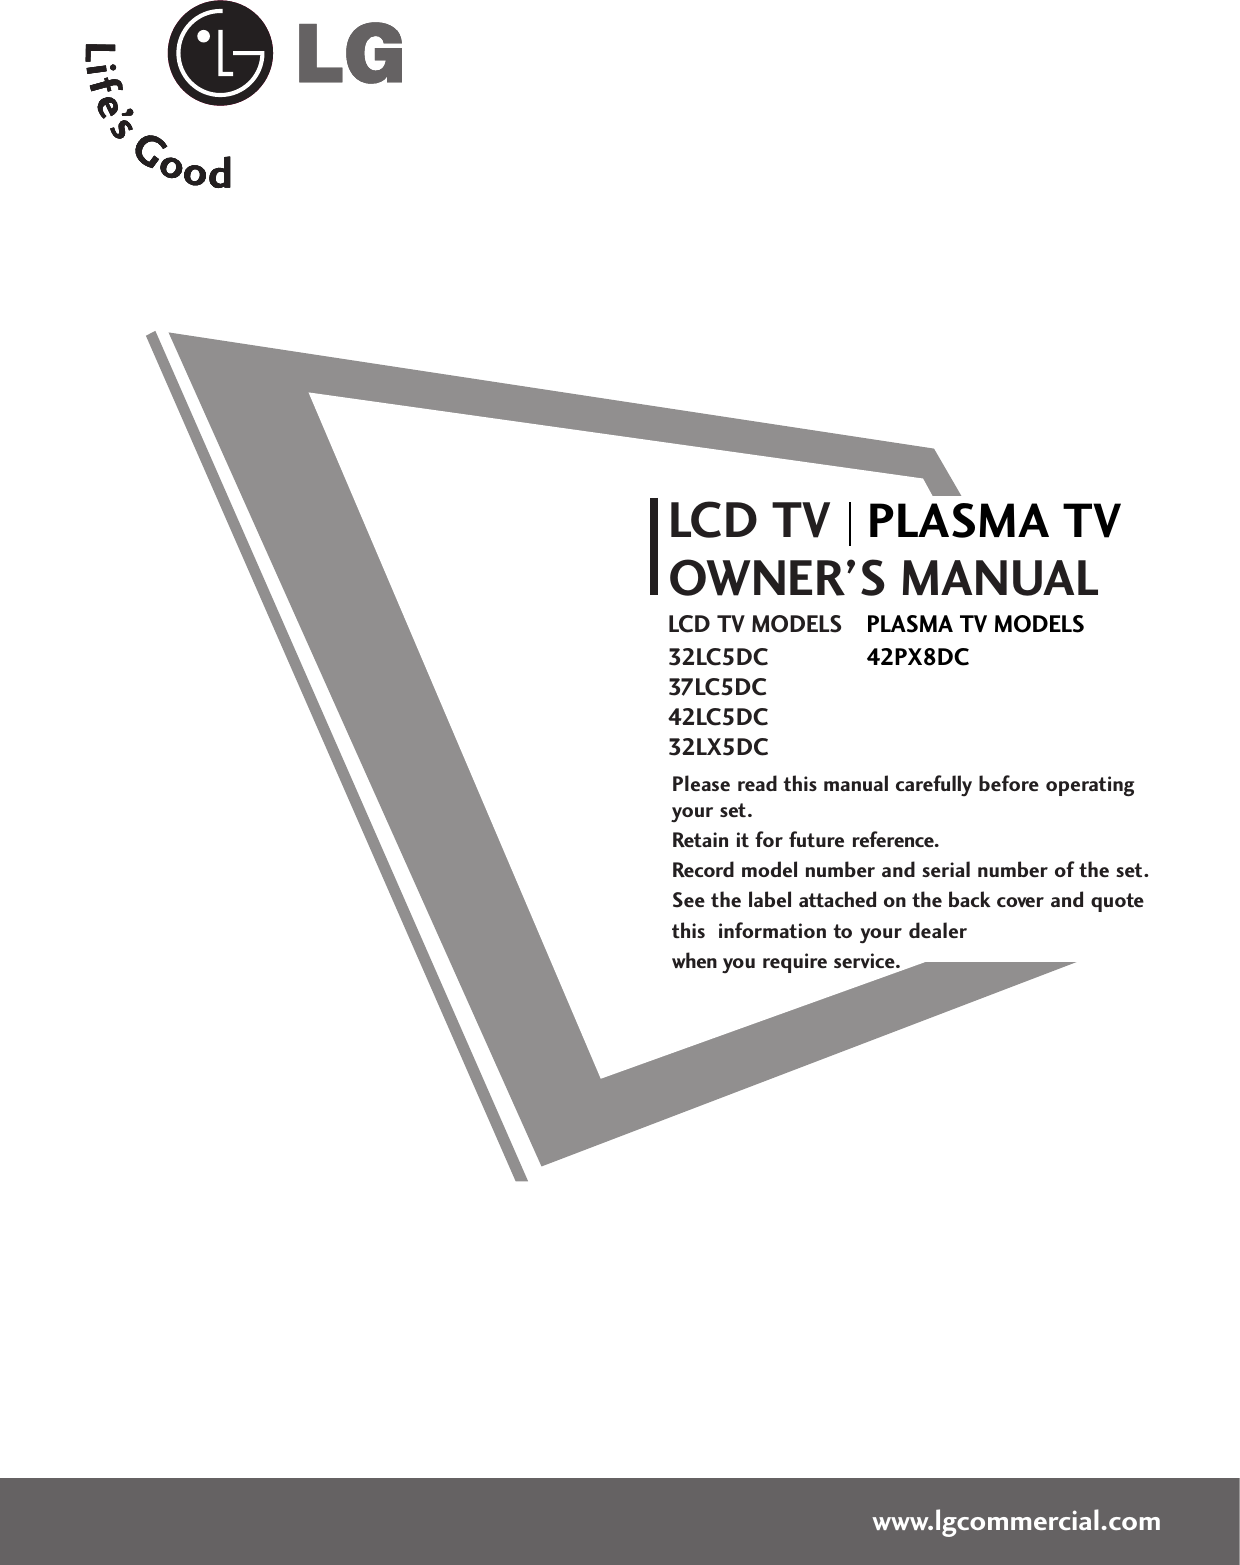 Please read this manual carefully before operatingyour set. Retain it for future reference.Record model number and serial number of the set. See the label attached on the back cover and quote this  information to your dealer when you require service.LCD TVOWNER’S MANUALLCD TV MODELS32LC5DC37LC5DC42LC5DC32LX5DCwww.lgcommercial.comPLASMA TV MODELS42PX8DCPLASMA TV